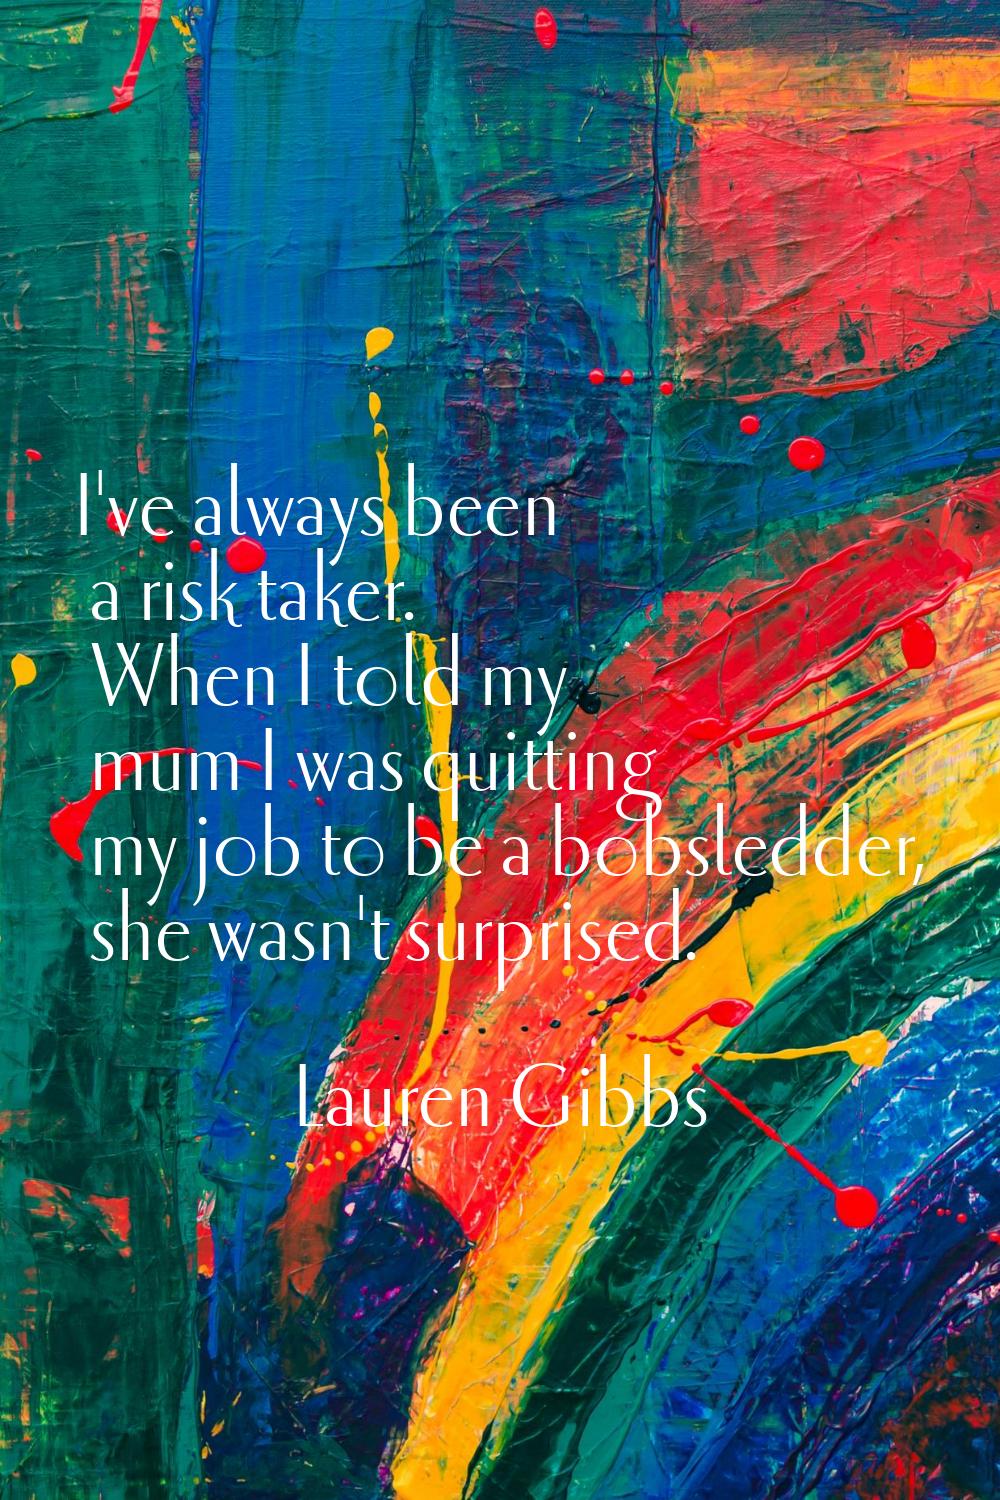 I've always been a risk taker. When I told my mum I was quitting my job to be a bobsledder, she was